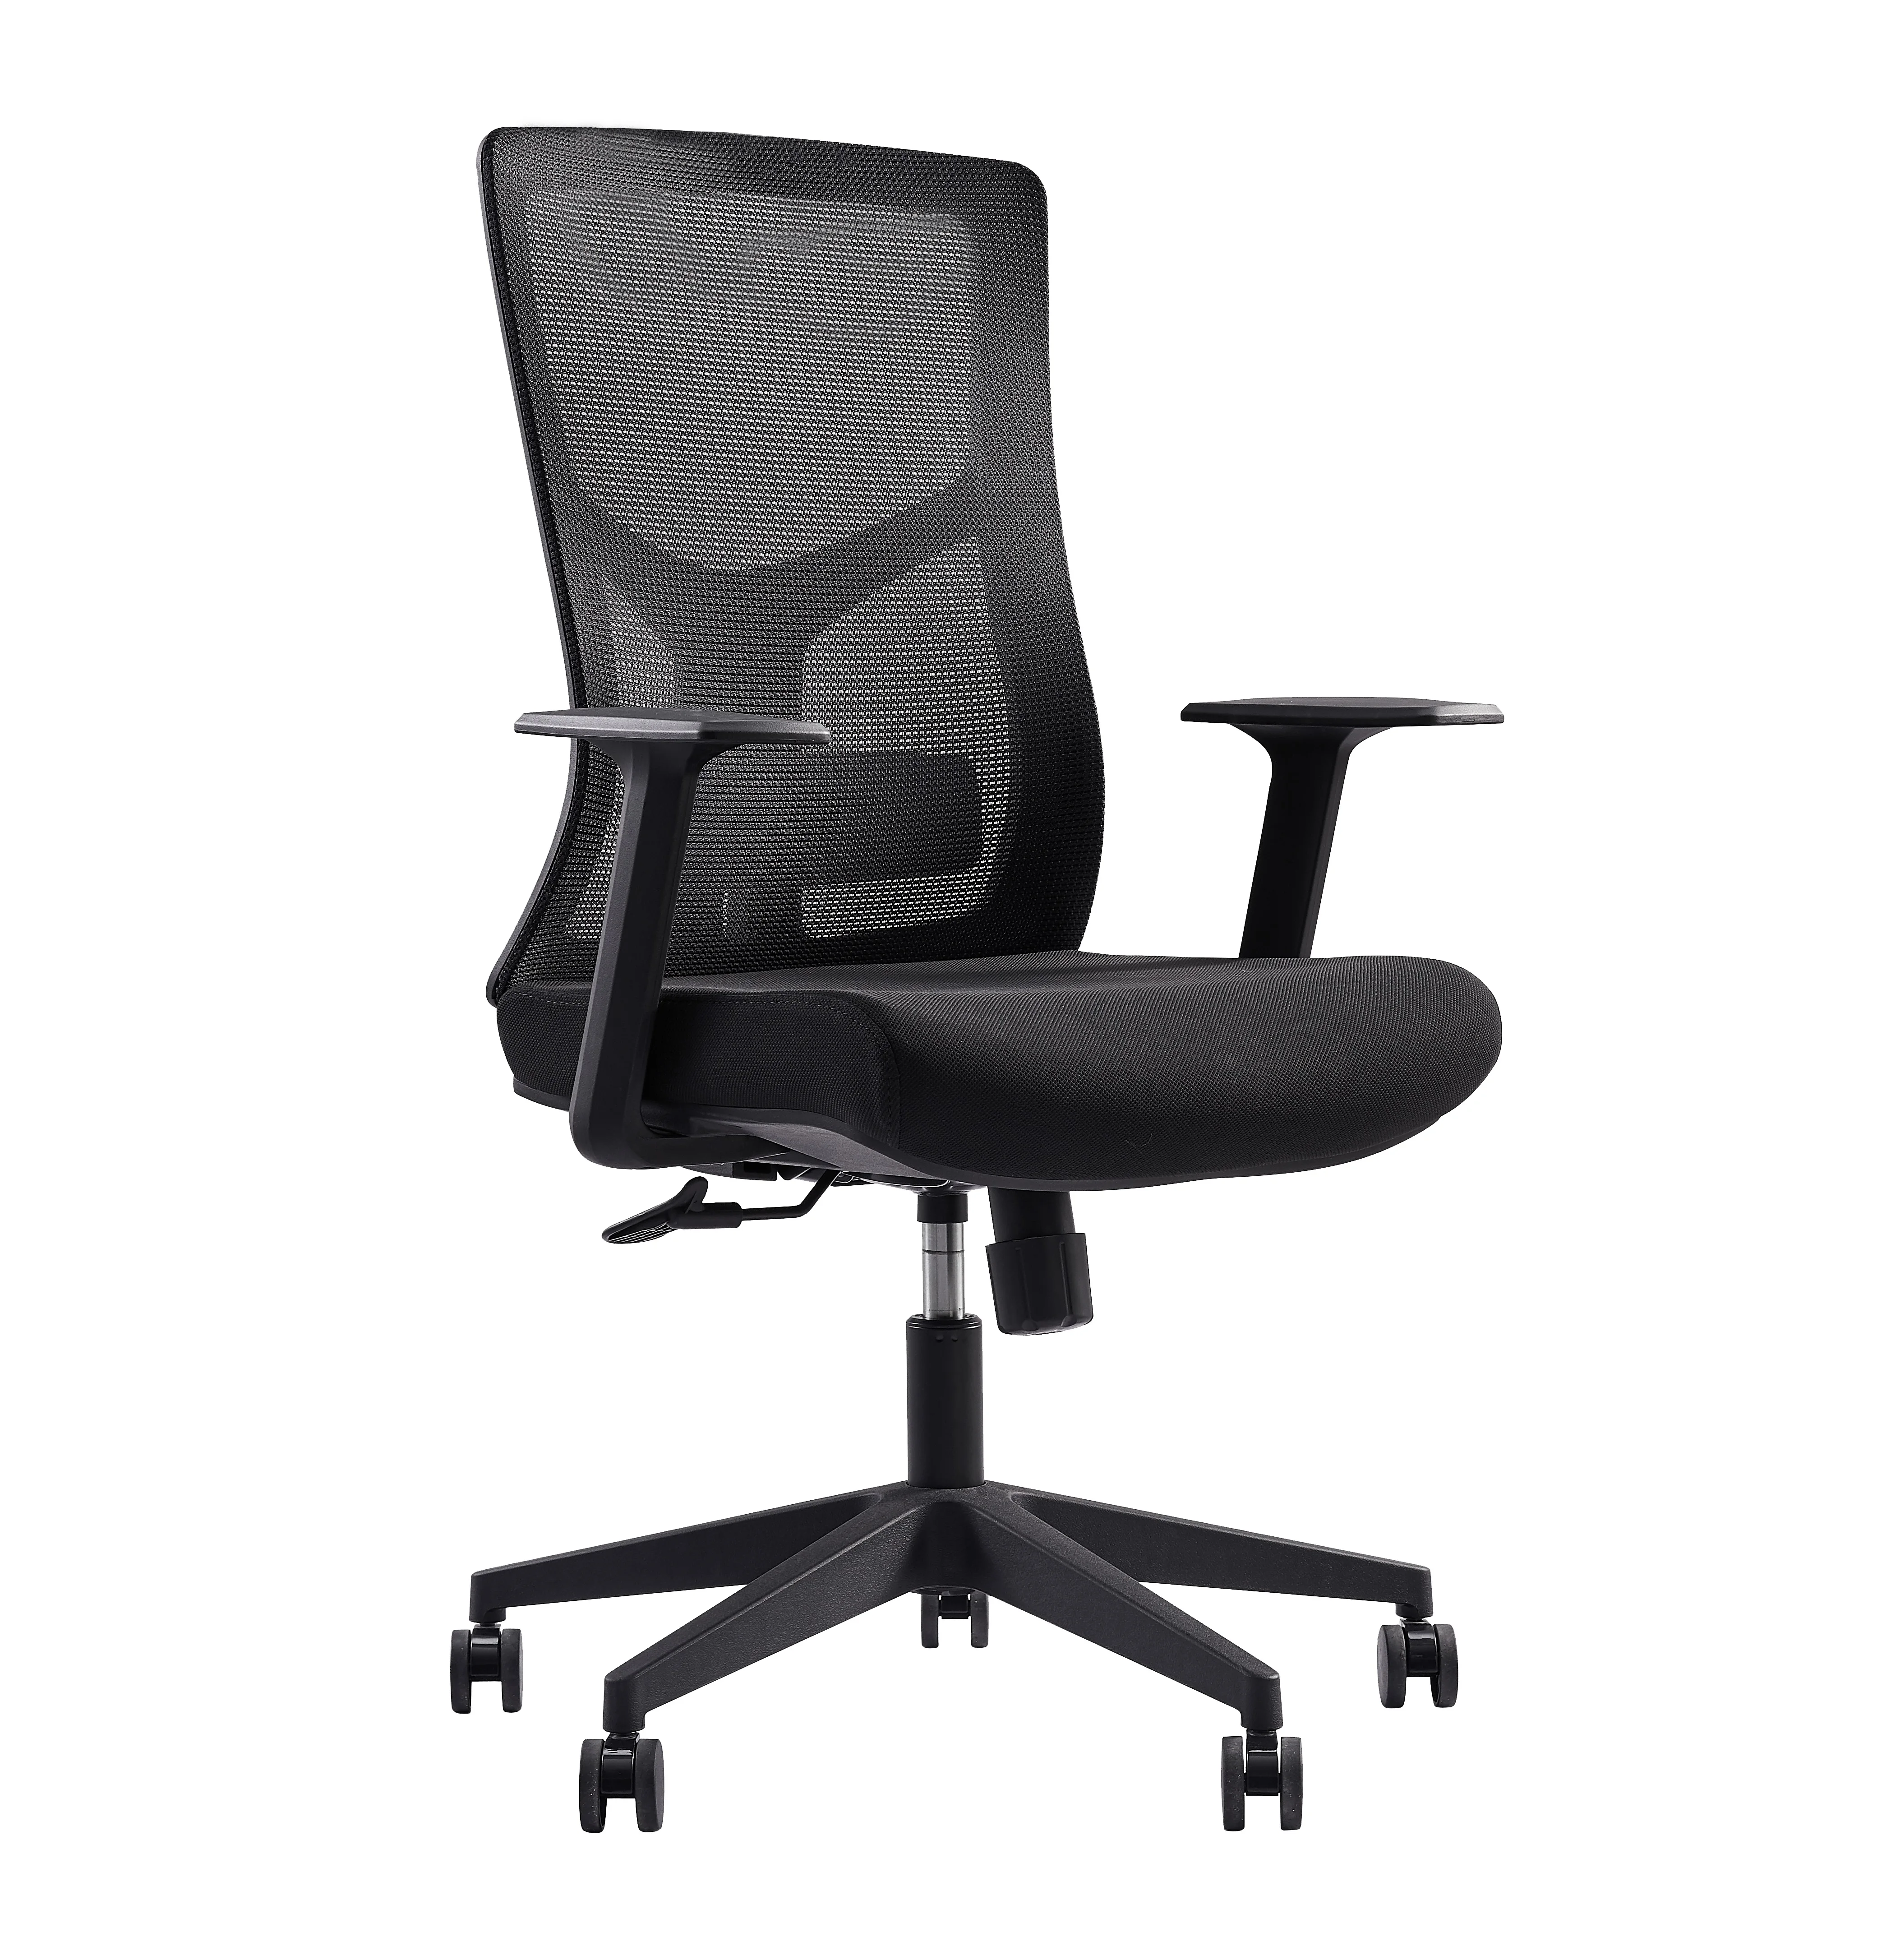 621b Swivel Executive Chair Office Chair Ergonomic for Commercial Furniture